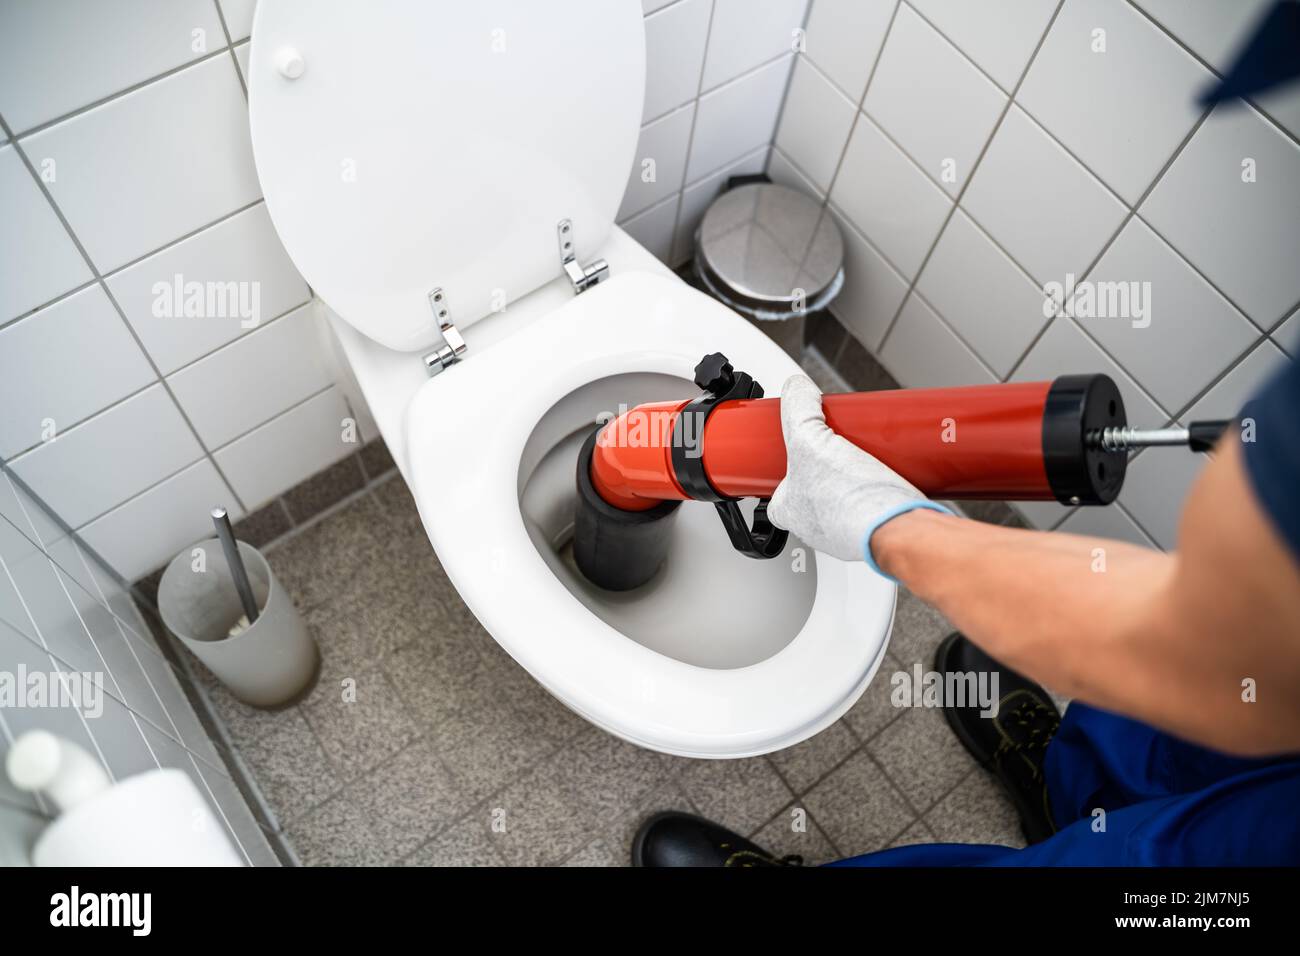 Plumber Toilet Blockage Assistance. WC Cleaning And Plumbing Stock Photo